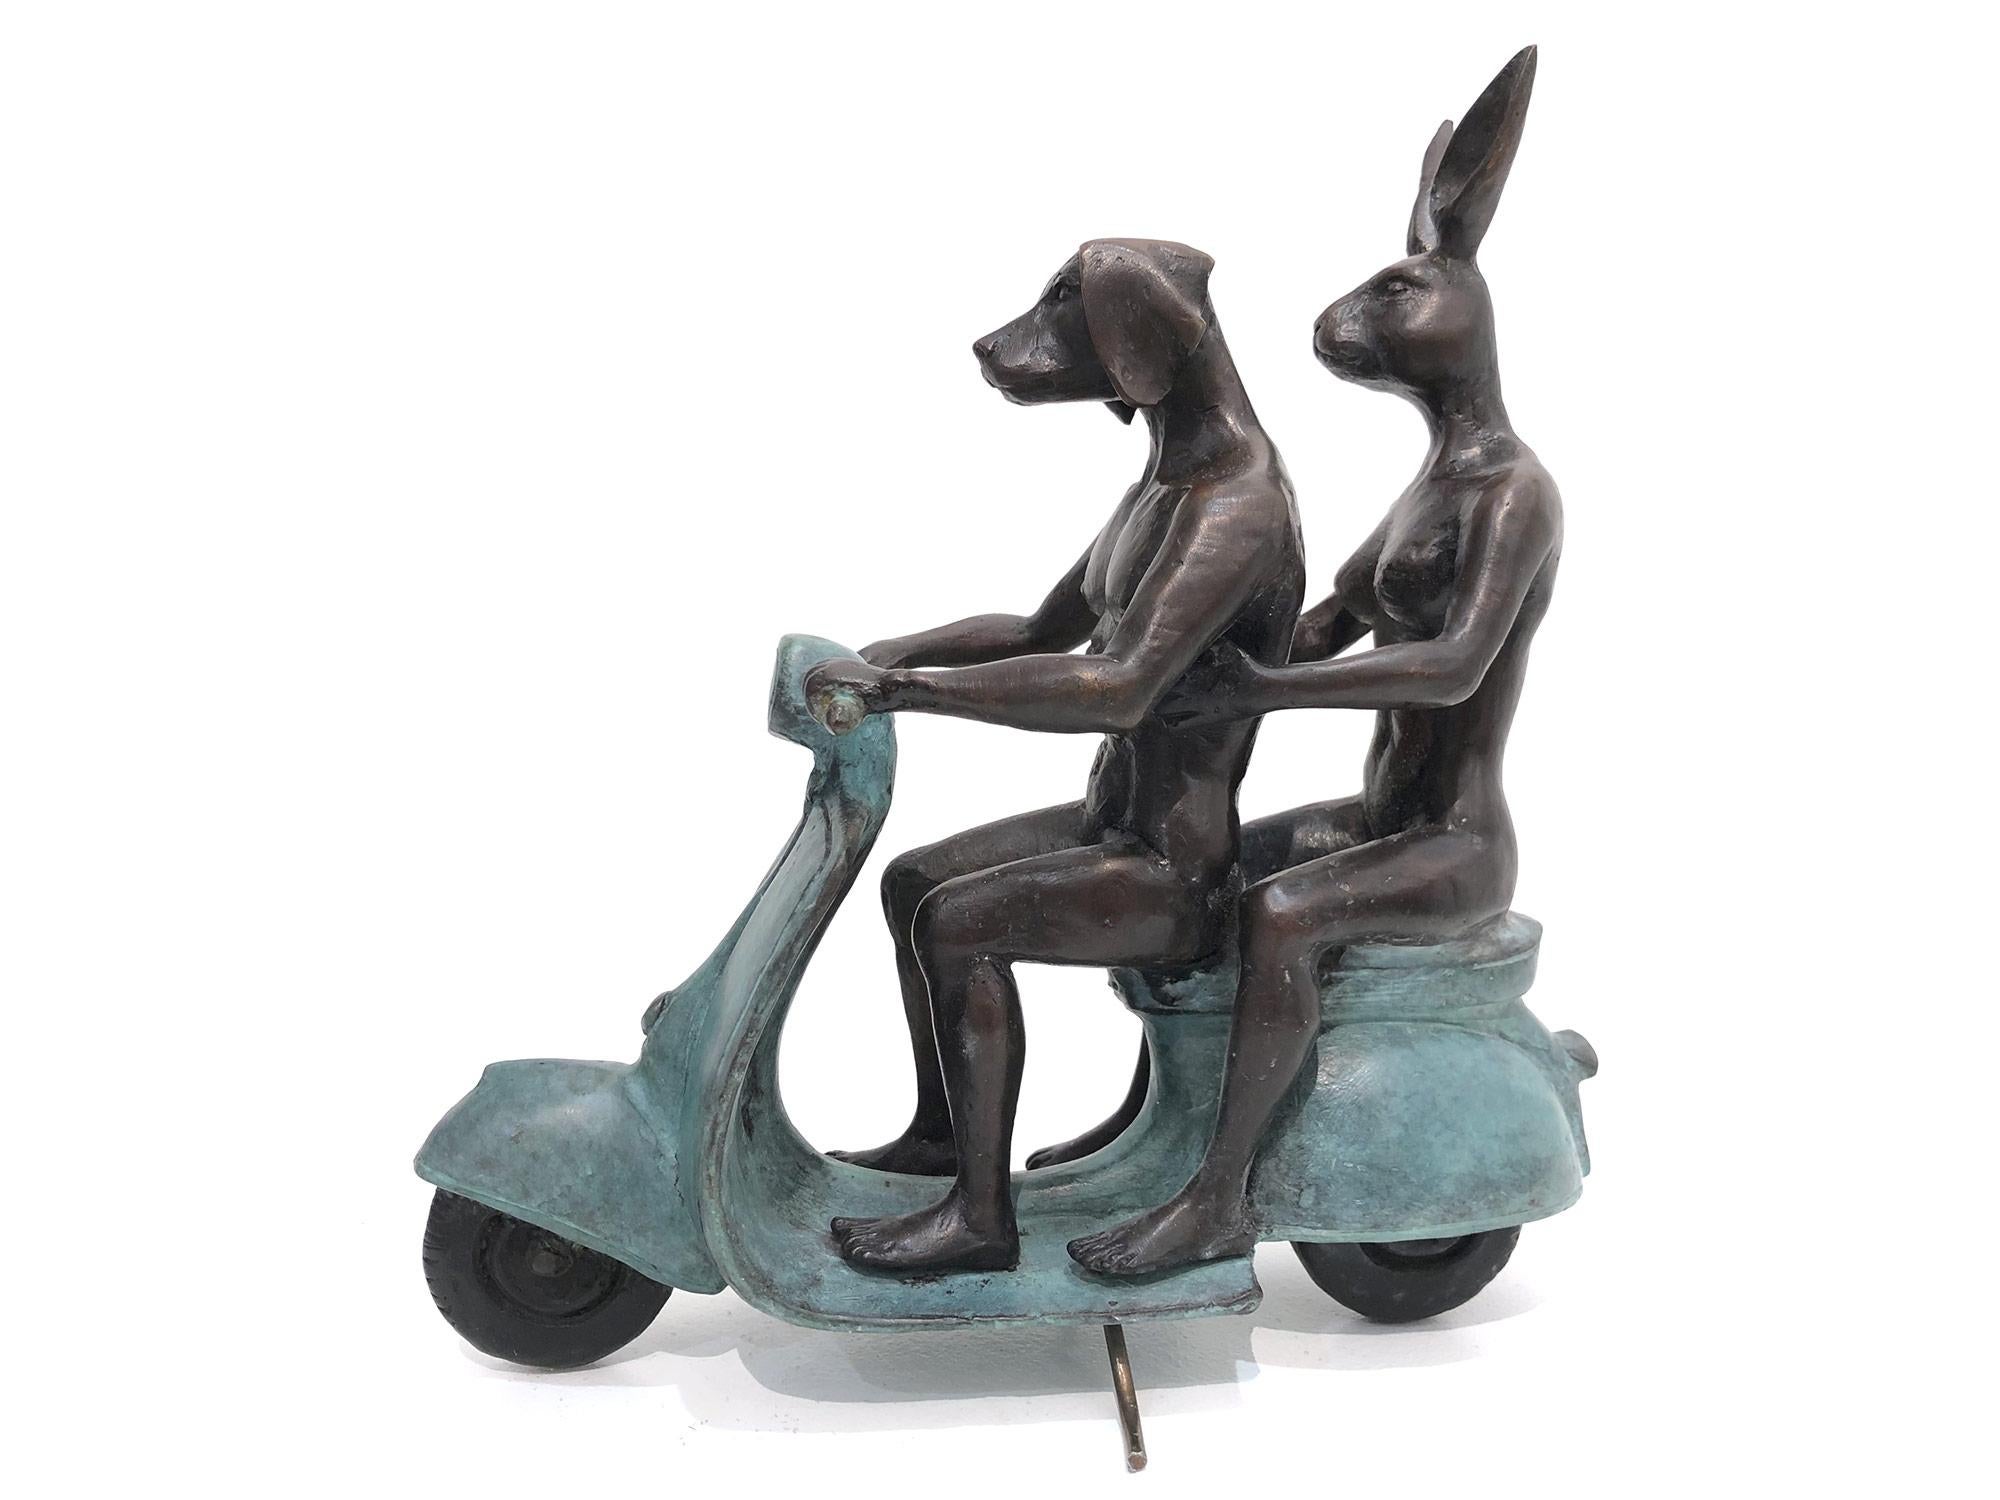 They were the Authentic Vespa Riders in Rome (Bronze with Green Patina) - Sculpture by Gillie and Marc Schattner